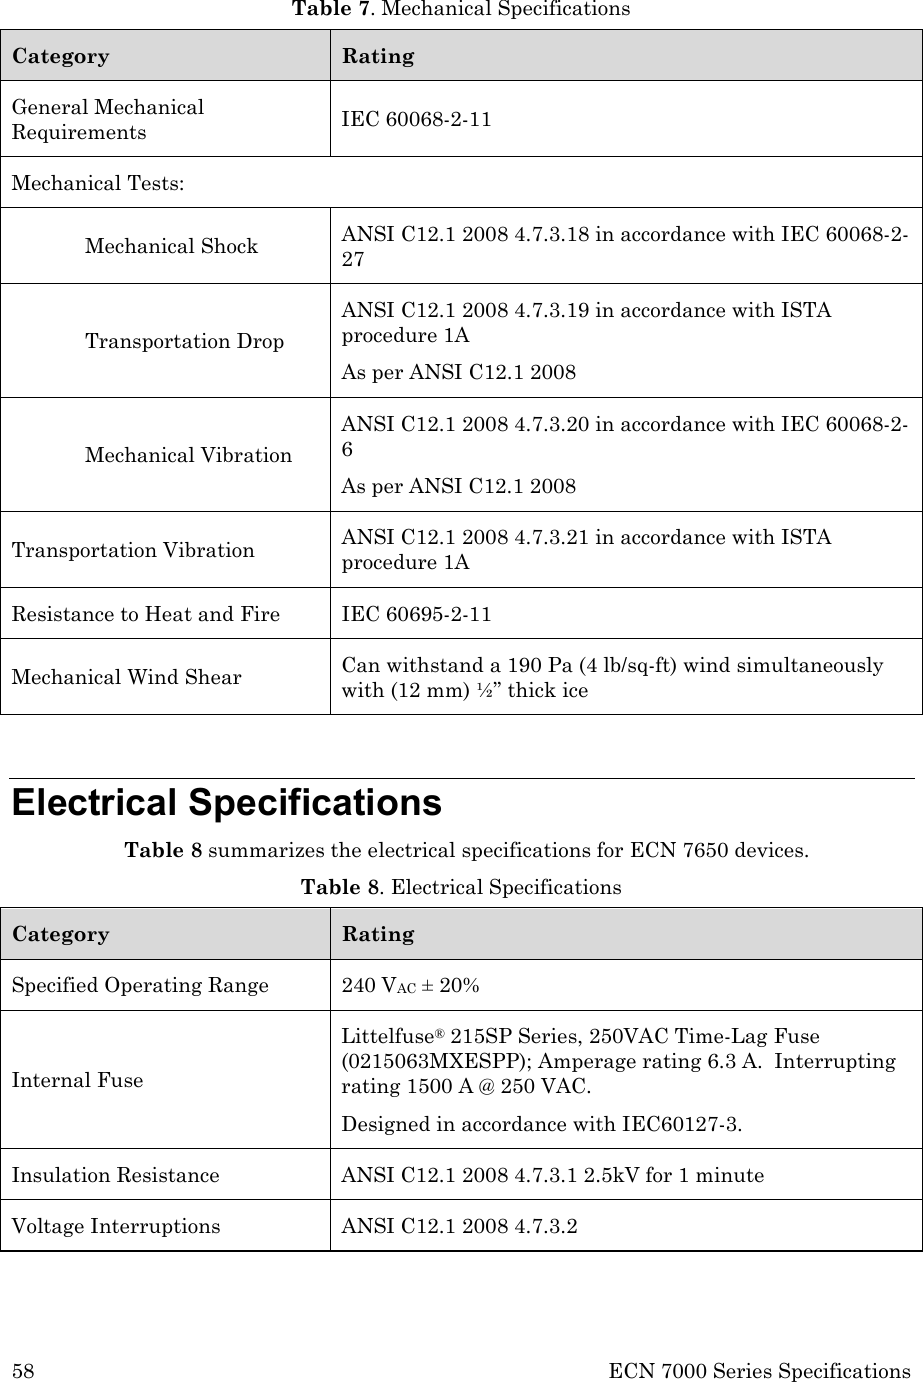 58 ECN 7000 Series Specifications  Table 7. Mechanical Specifications Category Rating General Mechanical Requirements IEC 60068-2-11 Mechanical Tests:  Mechanical Shock ANSI C12.1 2008 4.7.3.18 in accordance with IEC 60068-2-27 Transportation Drop ANSI C12.1 2008 4.7.3.19 in accordance with ISTA procedure 1A As per ANSI C12.1 2008 Mechanical Vibration ANSI C12.1 2008 4.7.3.20 in accordance with IEC 60068-2-6 As per ANSI C12.1 2008 Transportation Vibration ANSI C12.1 2008 4.7.3.21 in accordance with ISTA procedure 1A Resistance to Heat and Fire IEC 60695-2-11 Mechanical Wind Shear Can withstand a 190 Pa (4 lb/sq-ft) wind simultaneously with (12 mm) ½” thick ice  Electrical Specifications Table 8 summarizes the electrical specifications for ECN 7650 devices. Table 8. Electrical Specifications Category Rating Specified Operating Range 240 VAC ± 20%  Internal Fuse Littelfuse® 215SP Series, 250VAC Time-Lag Fuse (0215063MXESPP); Amperage rating 6.3 A.  Interrupting rating 1500 A @ 250 VAC. Designed in accordance with IEC60127-3.   Insulation Resistance ANSI C12.1 2008 4.7.3.1 2.5kV for 1 minute Voltage Interruptions ANSI C12.1 2008 4.7.3.2 